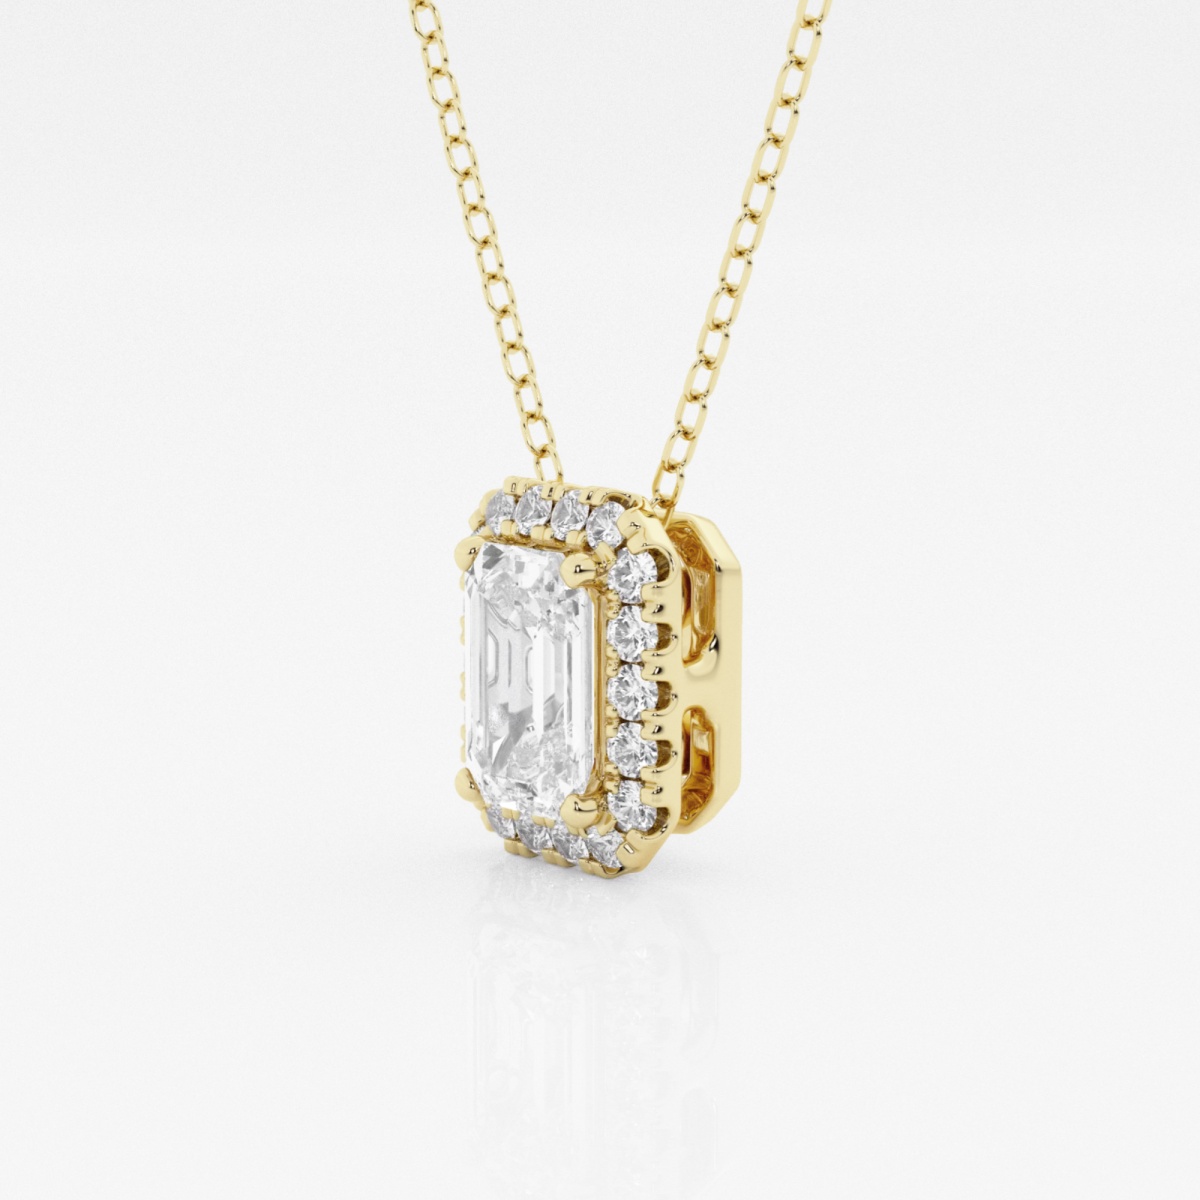 Additional Image 1 for  1 1/5 ctw Emerald Lab Grown Diamond Halo Pendant with Adjustable Chain